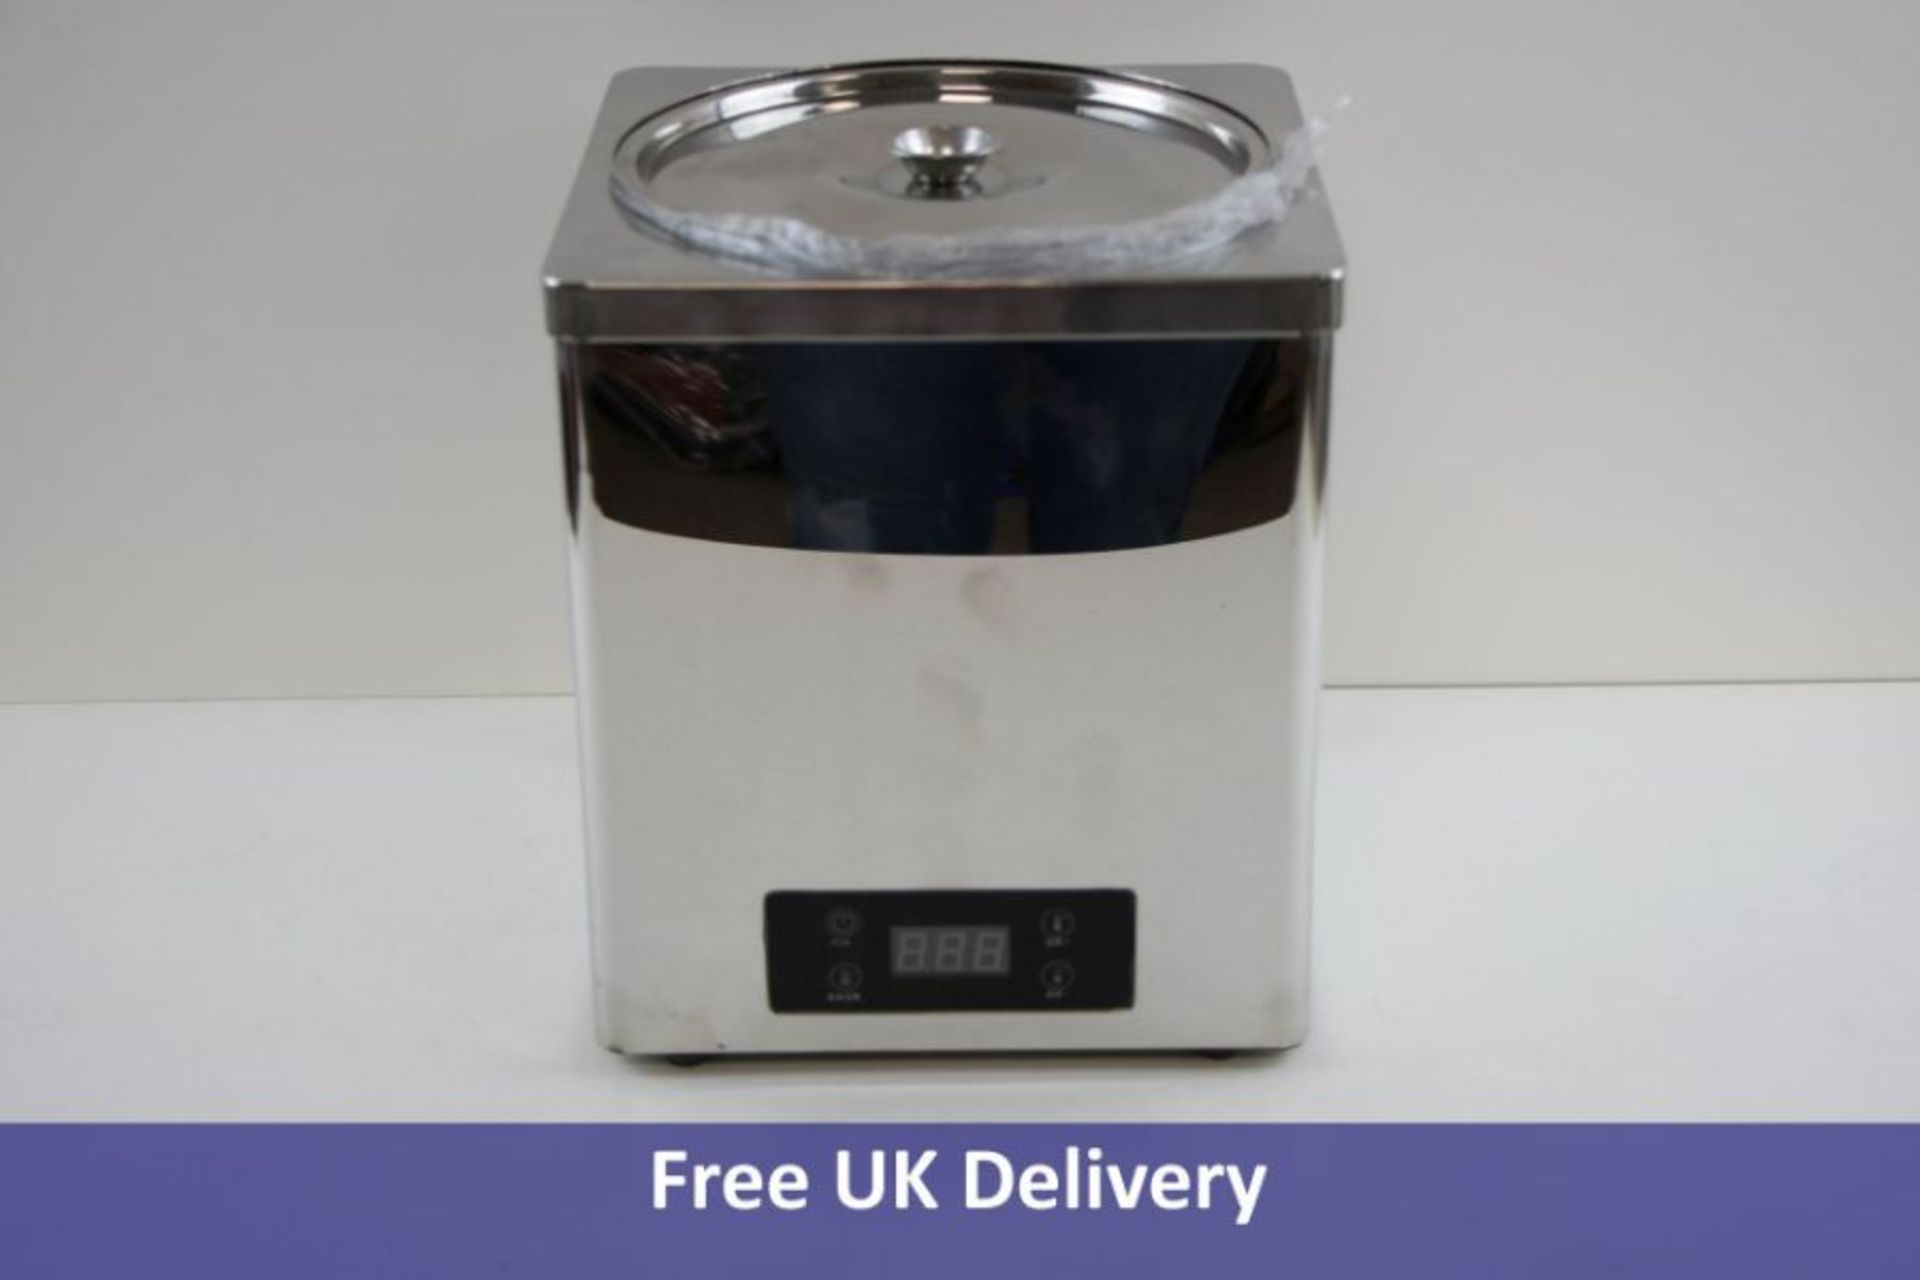 Stainless Steel Bain Marie Electric Food Warmer with 1 Pot